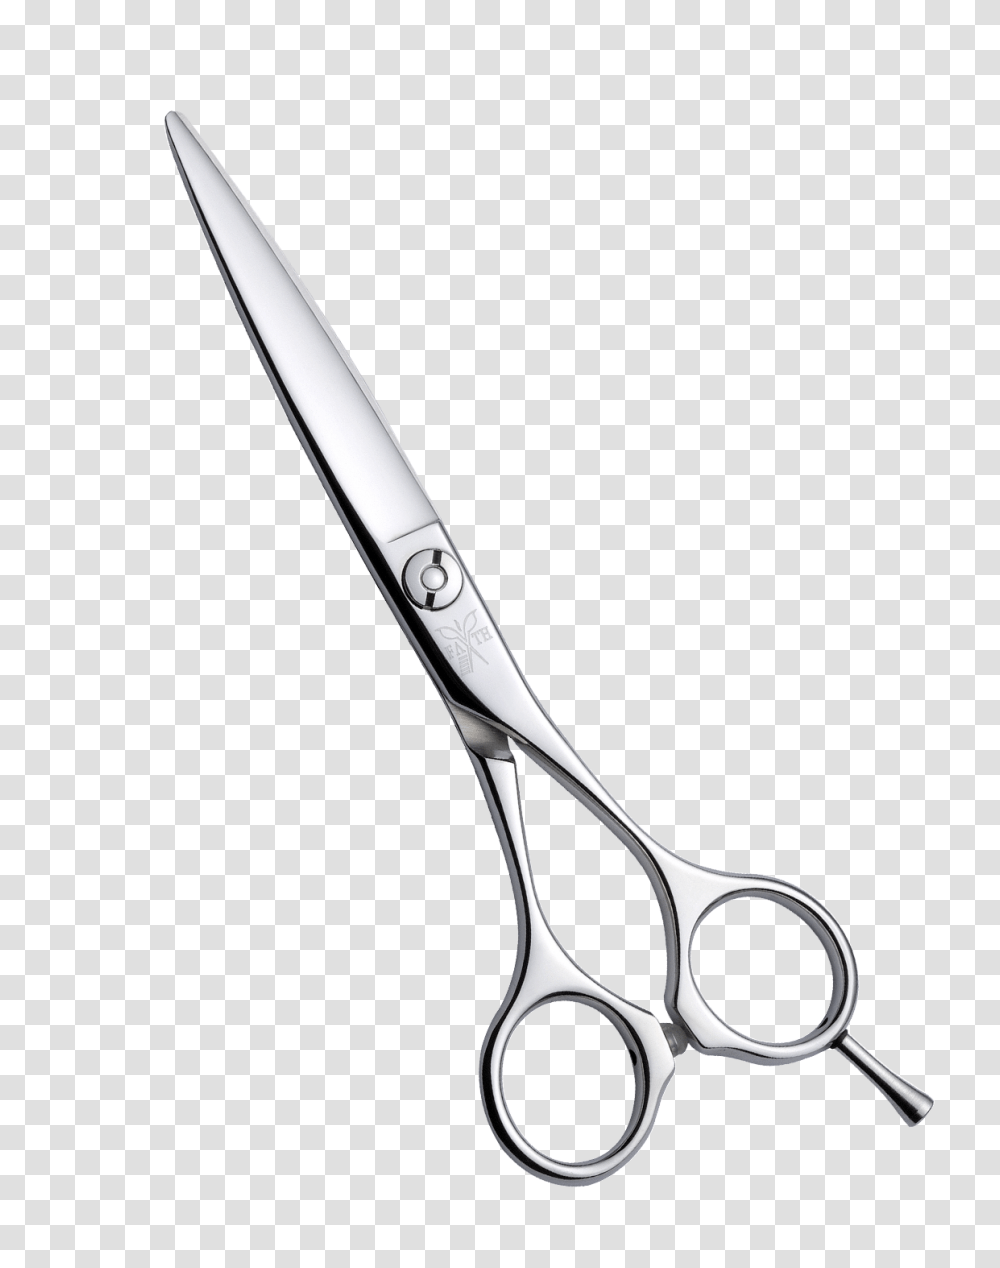 Images Of Barber Scissors Clip Art, Weapon, Weaponry, Blade, Shears Transparent Png